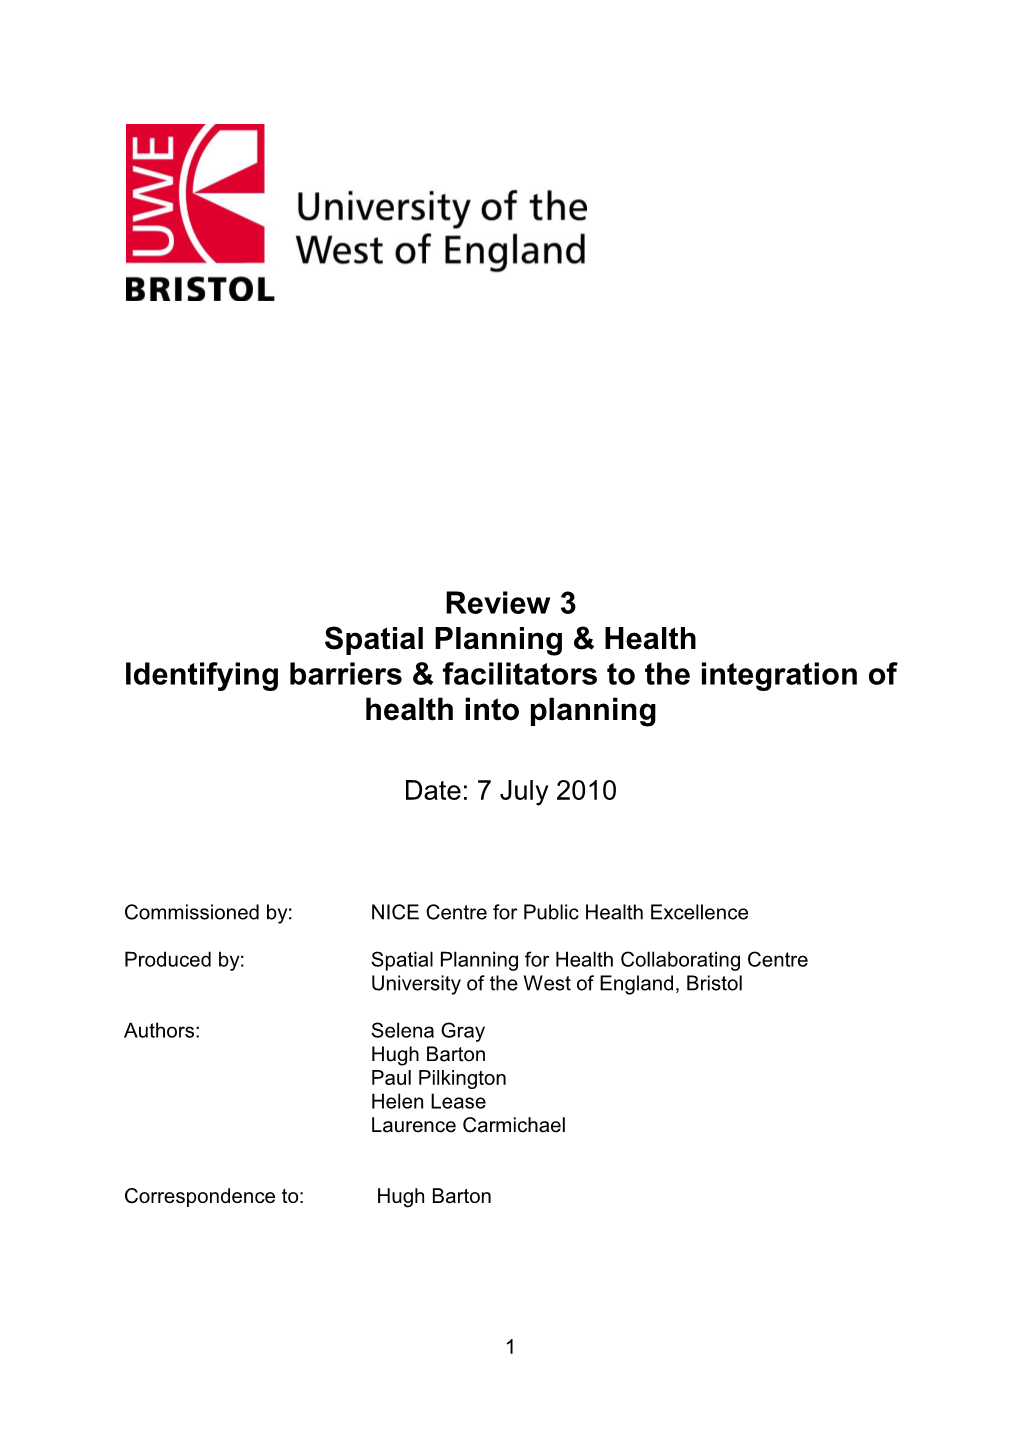 Review 3 Spatial Planning & Health Identifying Barriers & Facilitators To